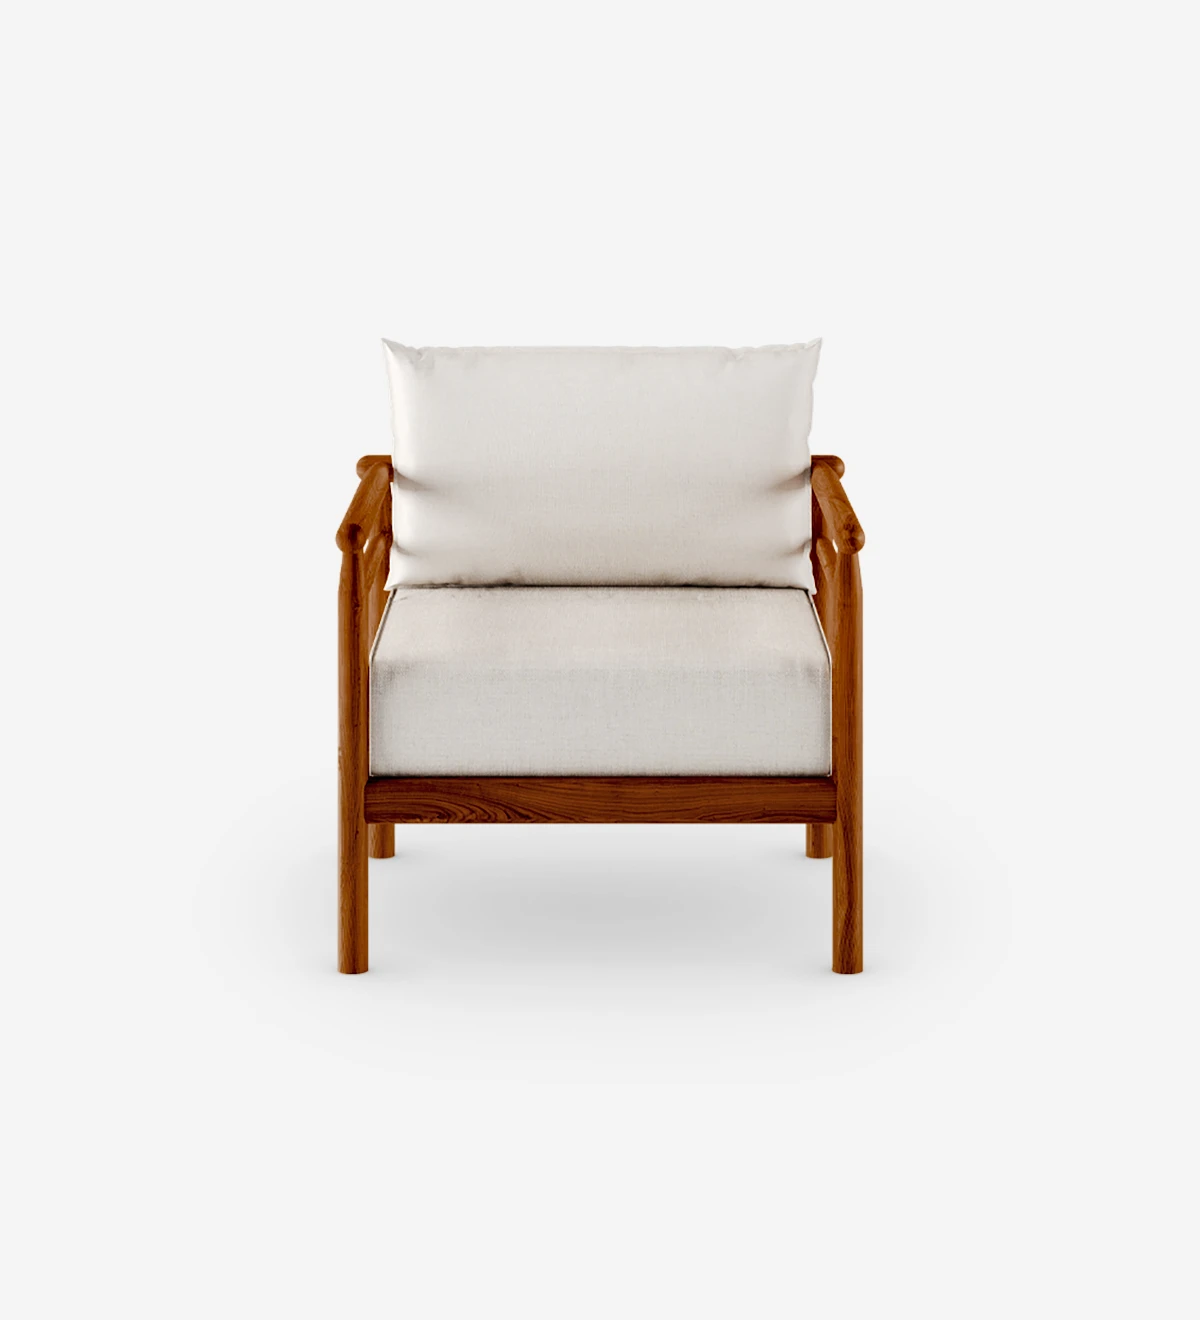 Maple with fabric upholstered cushions and structure in honey-colored natural wood.